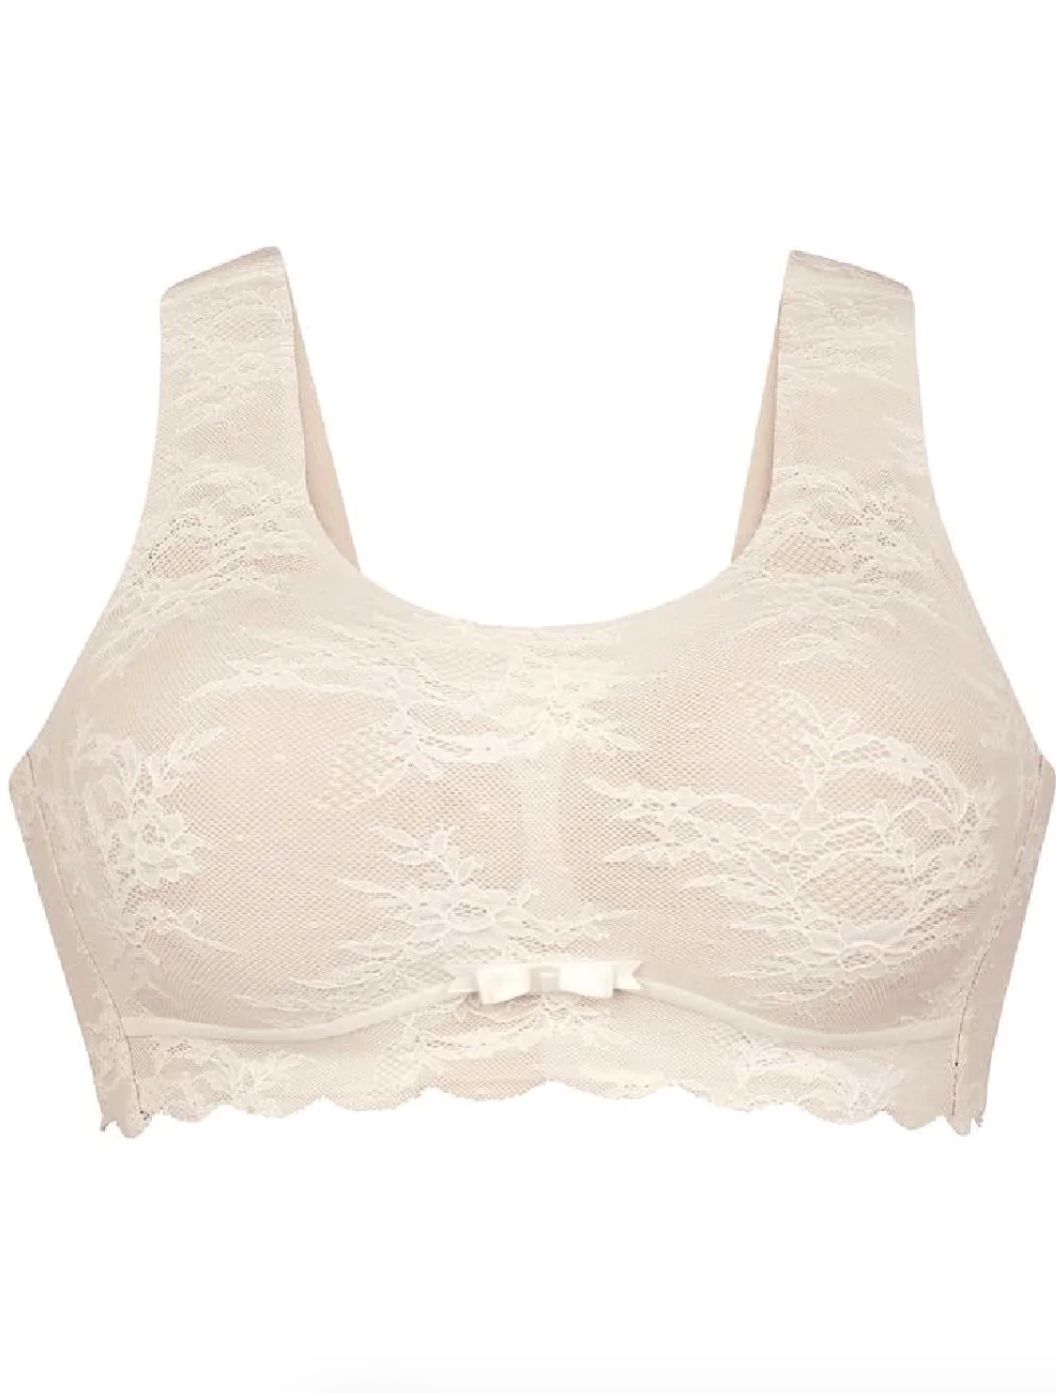 Essentials Lace Bralette - Crystal